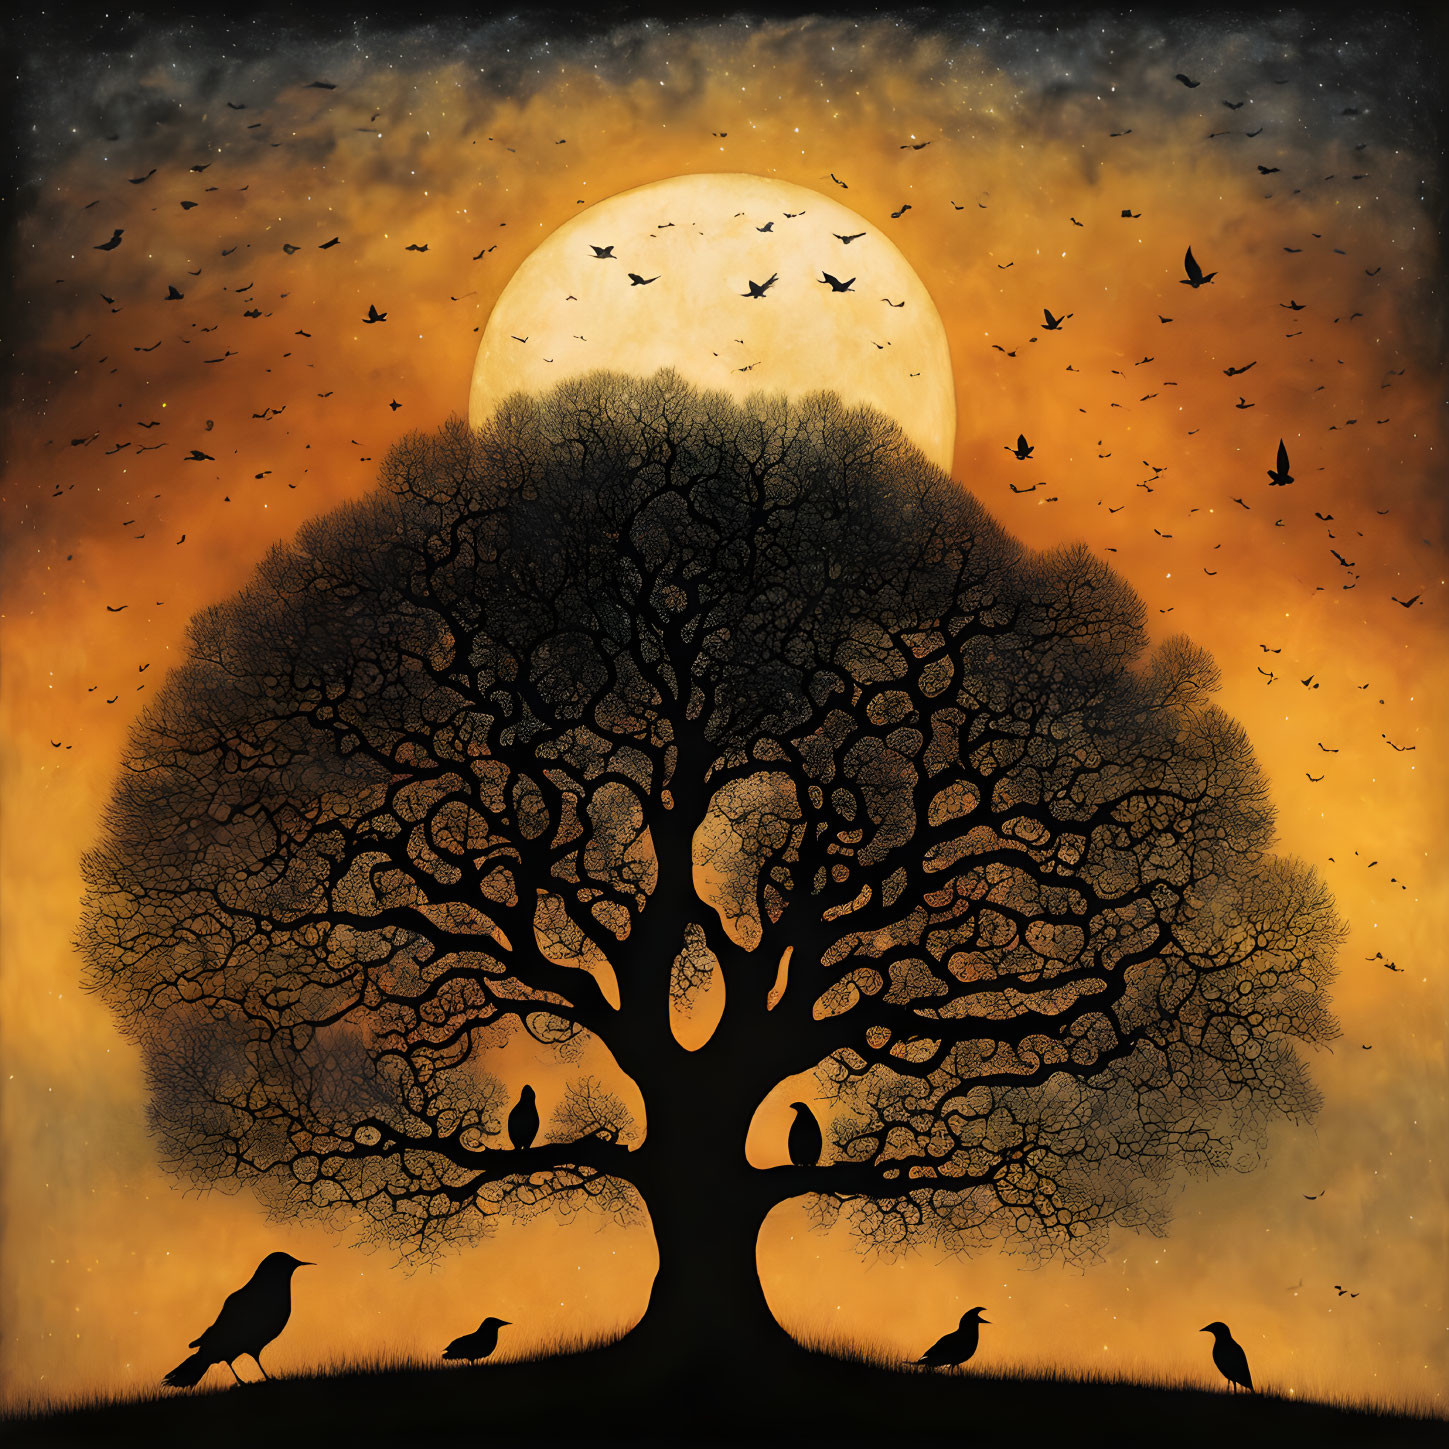 The Time of Crows